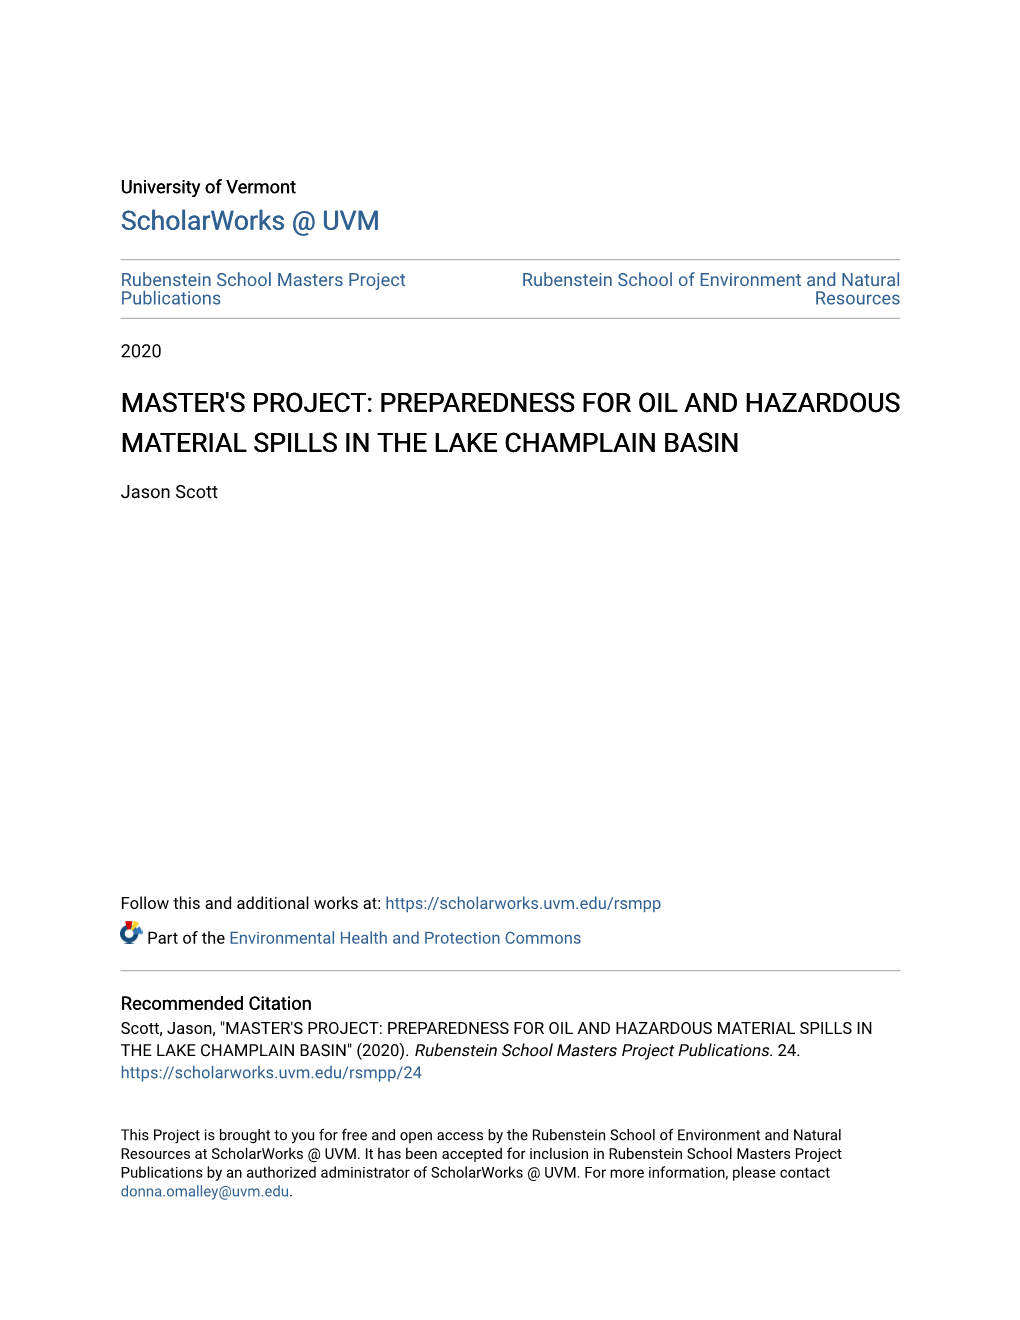 Master's Project: Preparedness for Oil and Hazardous Material Spills in the Lake Champlain Basin